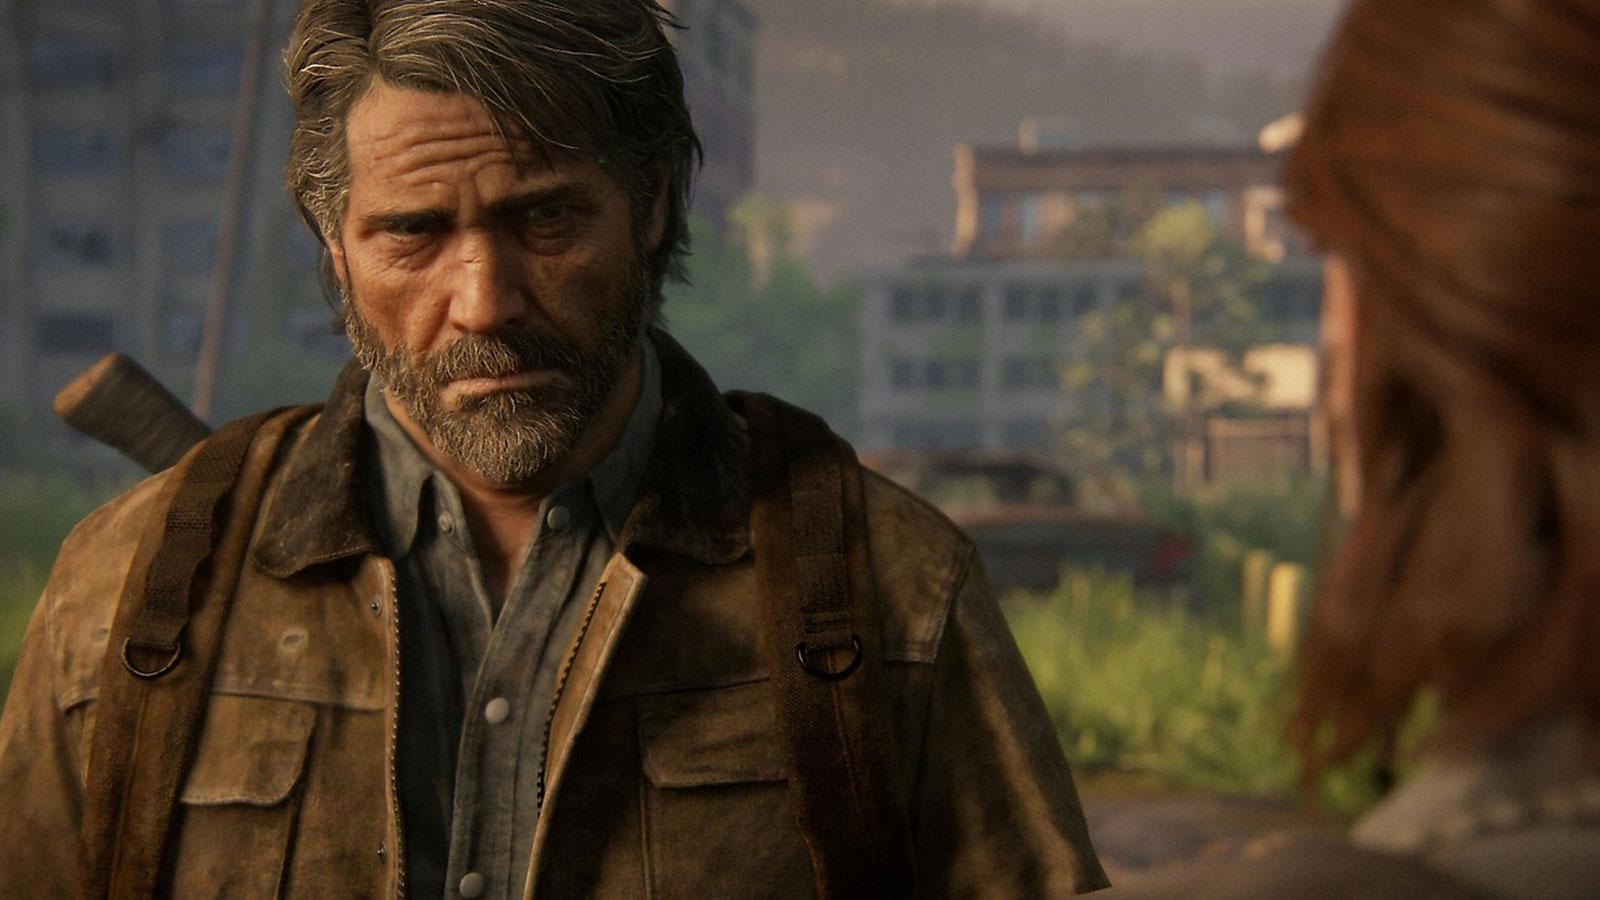 Troy Baker hopes to return as Joel in The Last of Us Part 3: “I am there” -  Dexerto